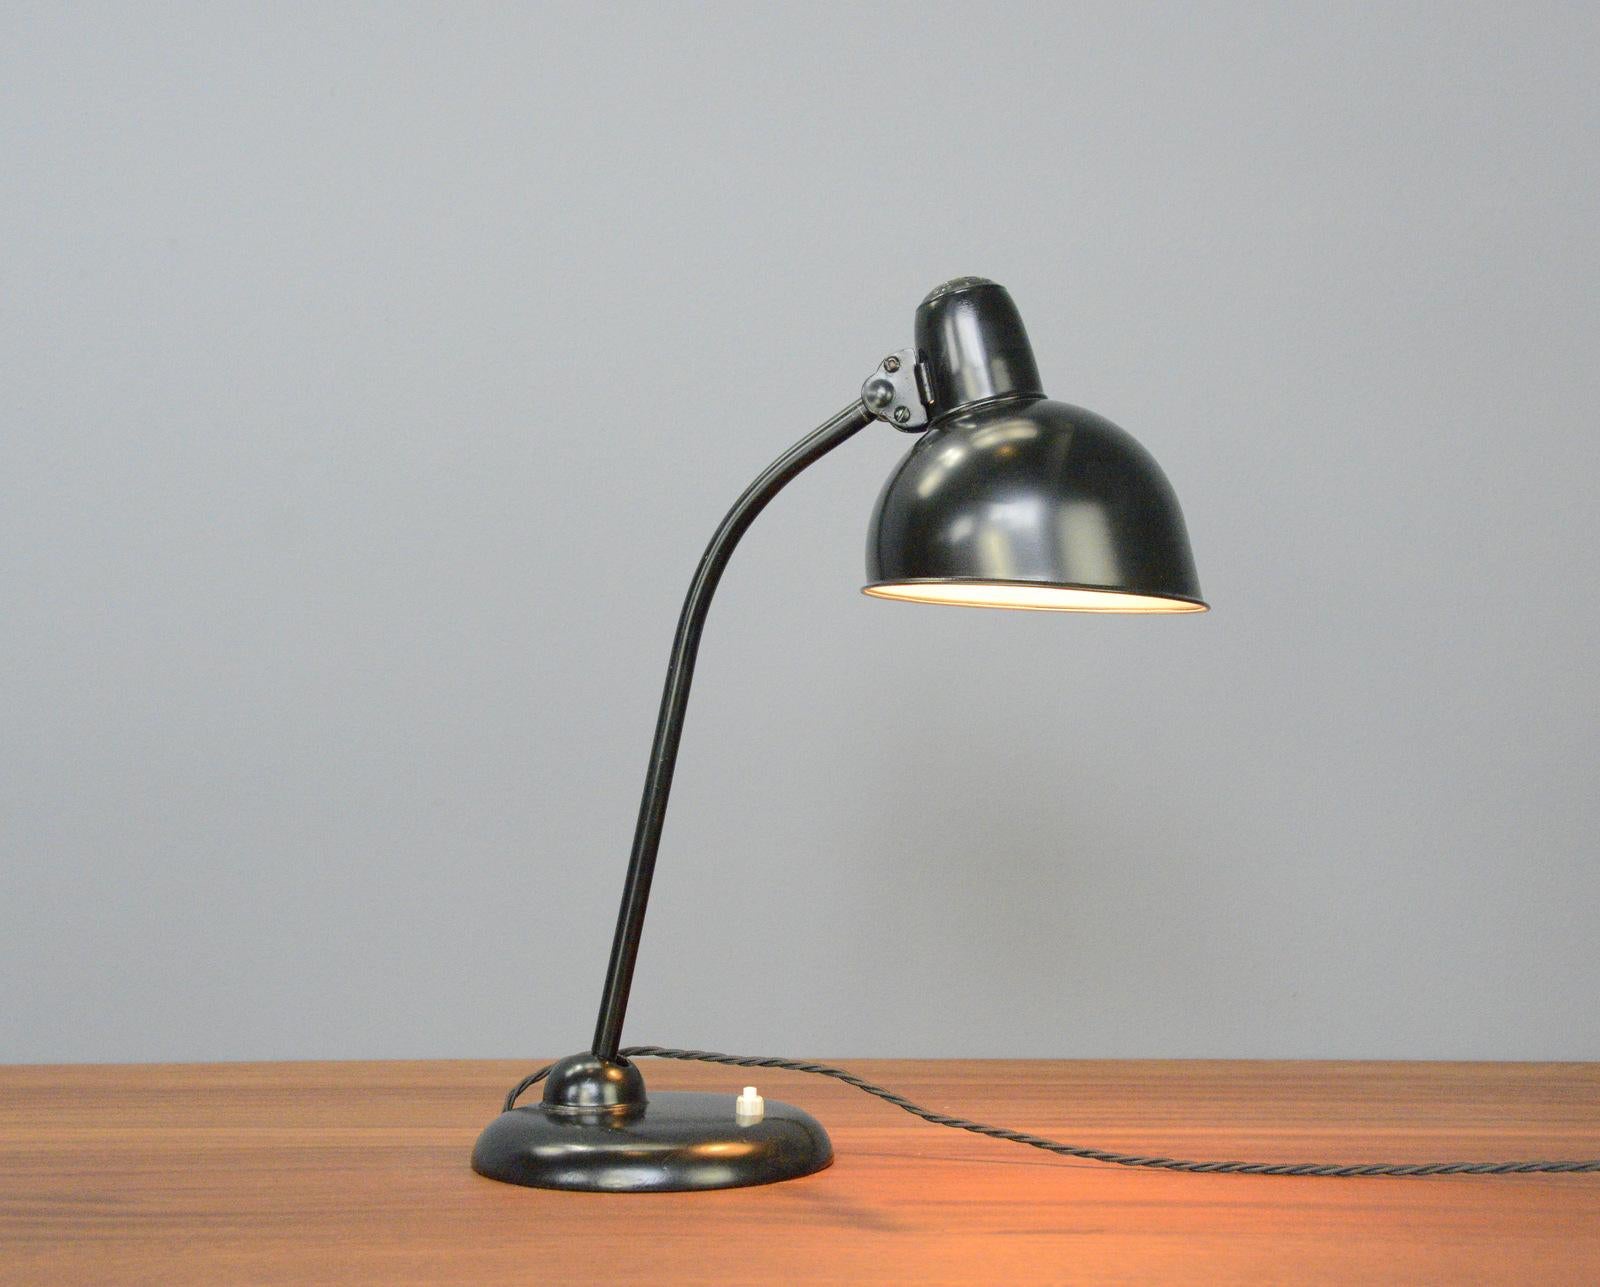 Steel Model 6556 Table Lamp by Kaiser Idell circa 1930s